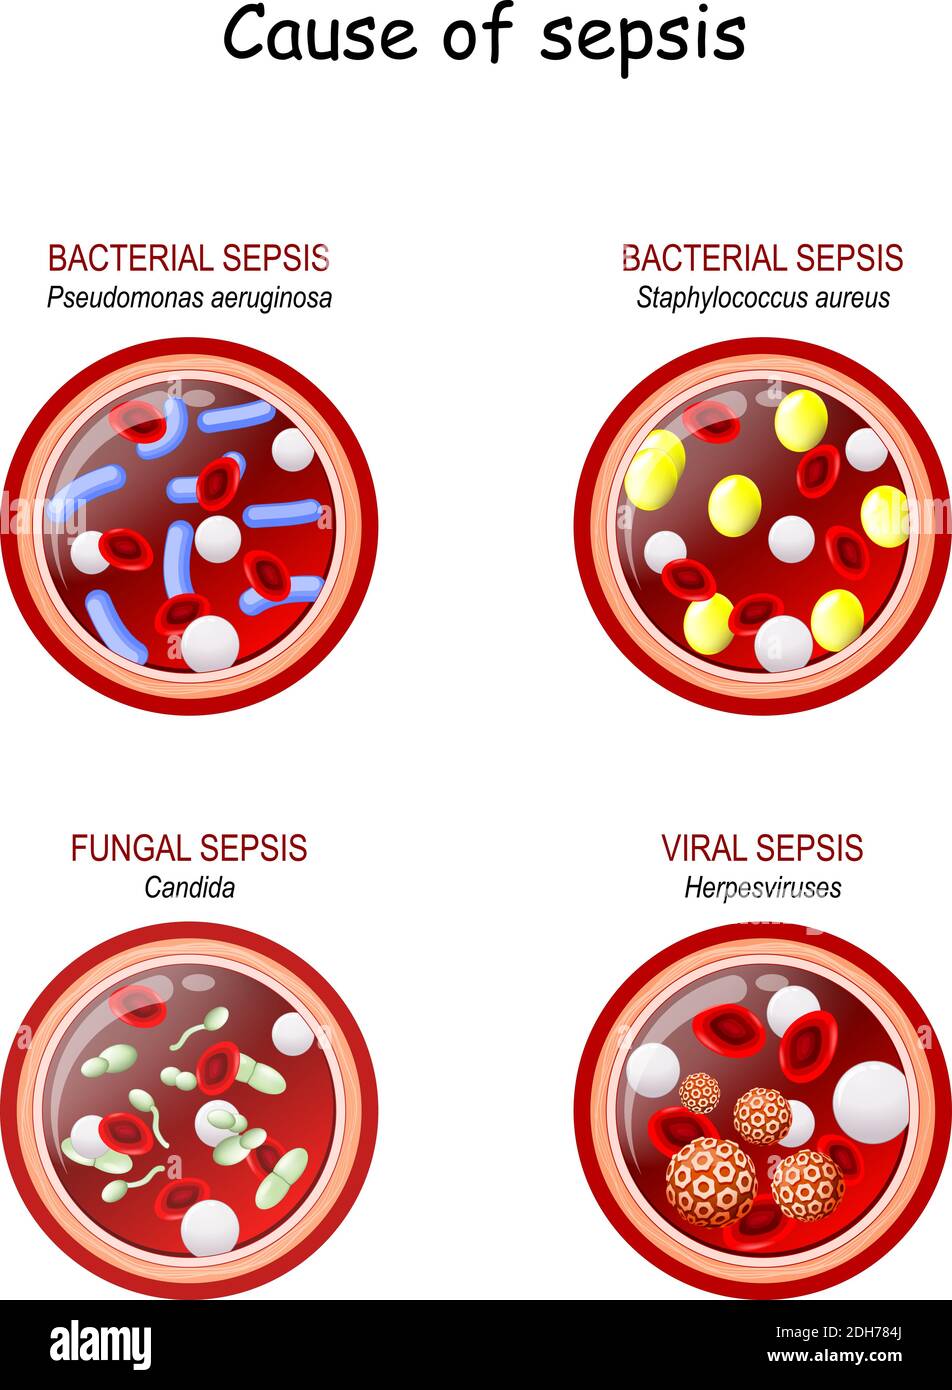 cause of sepsis. fungal (candida) viral (herpes) bacterial (staphylococcus aureus, pseudomonas aeruginosa).  Close-up of cross section of blood vessel Stock Vector